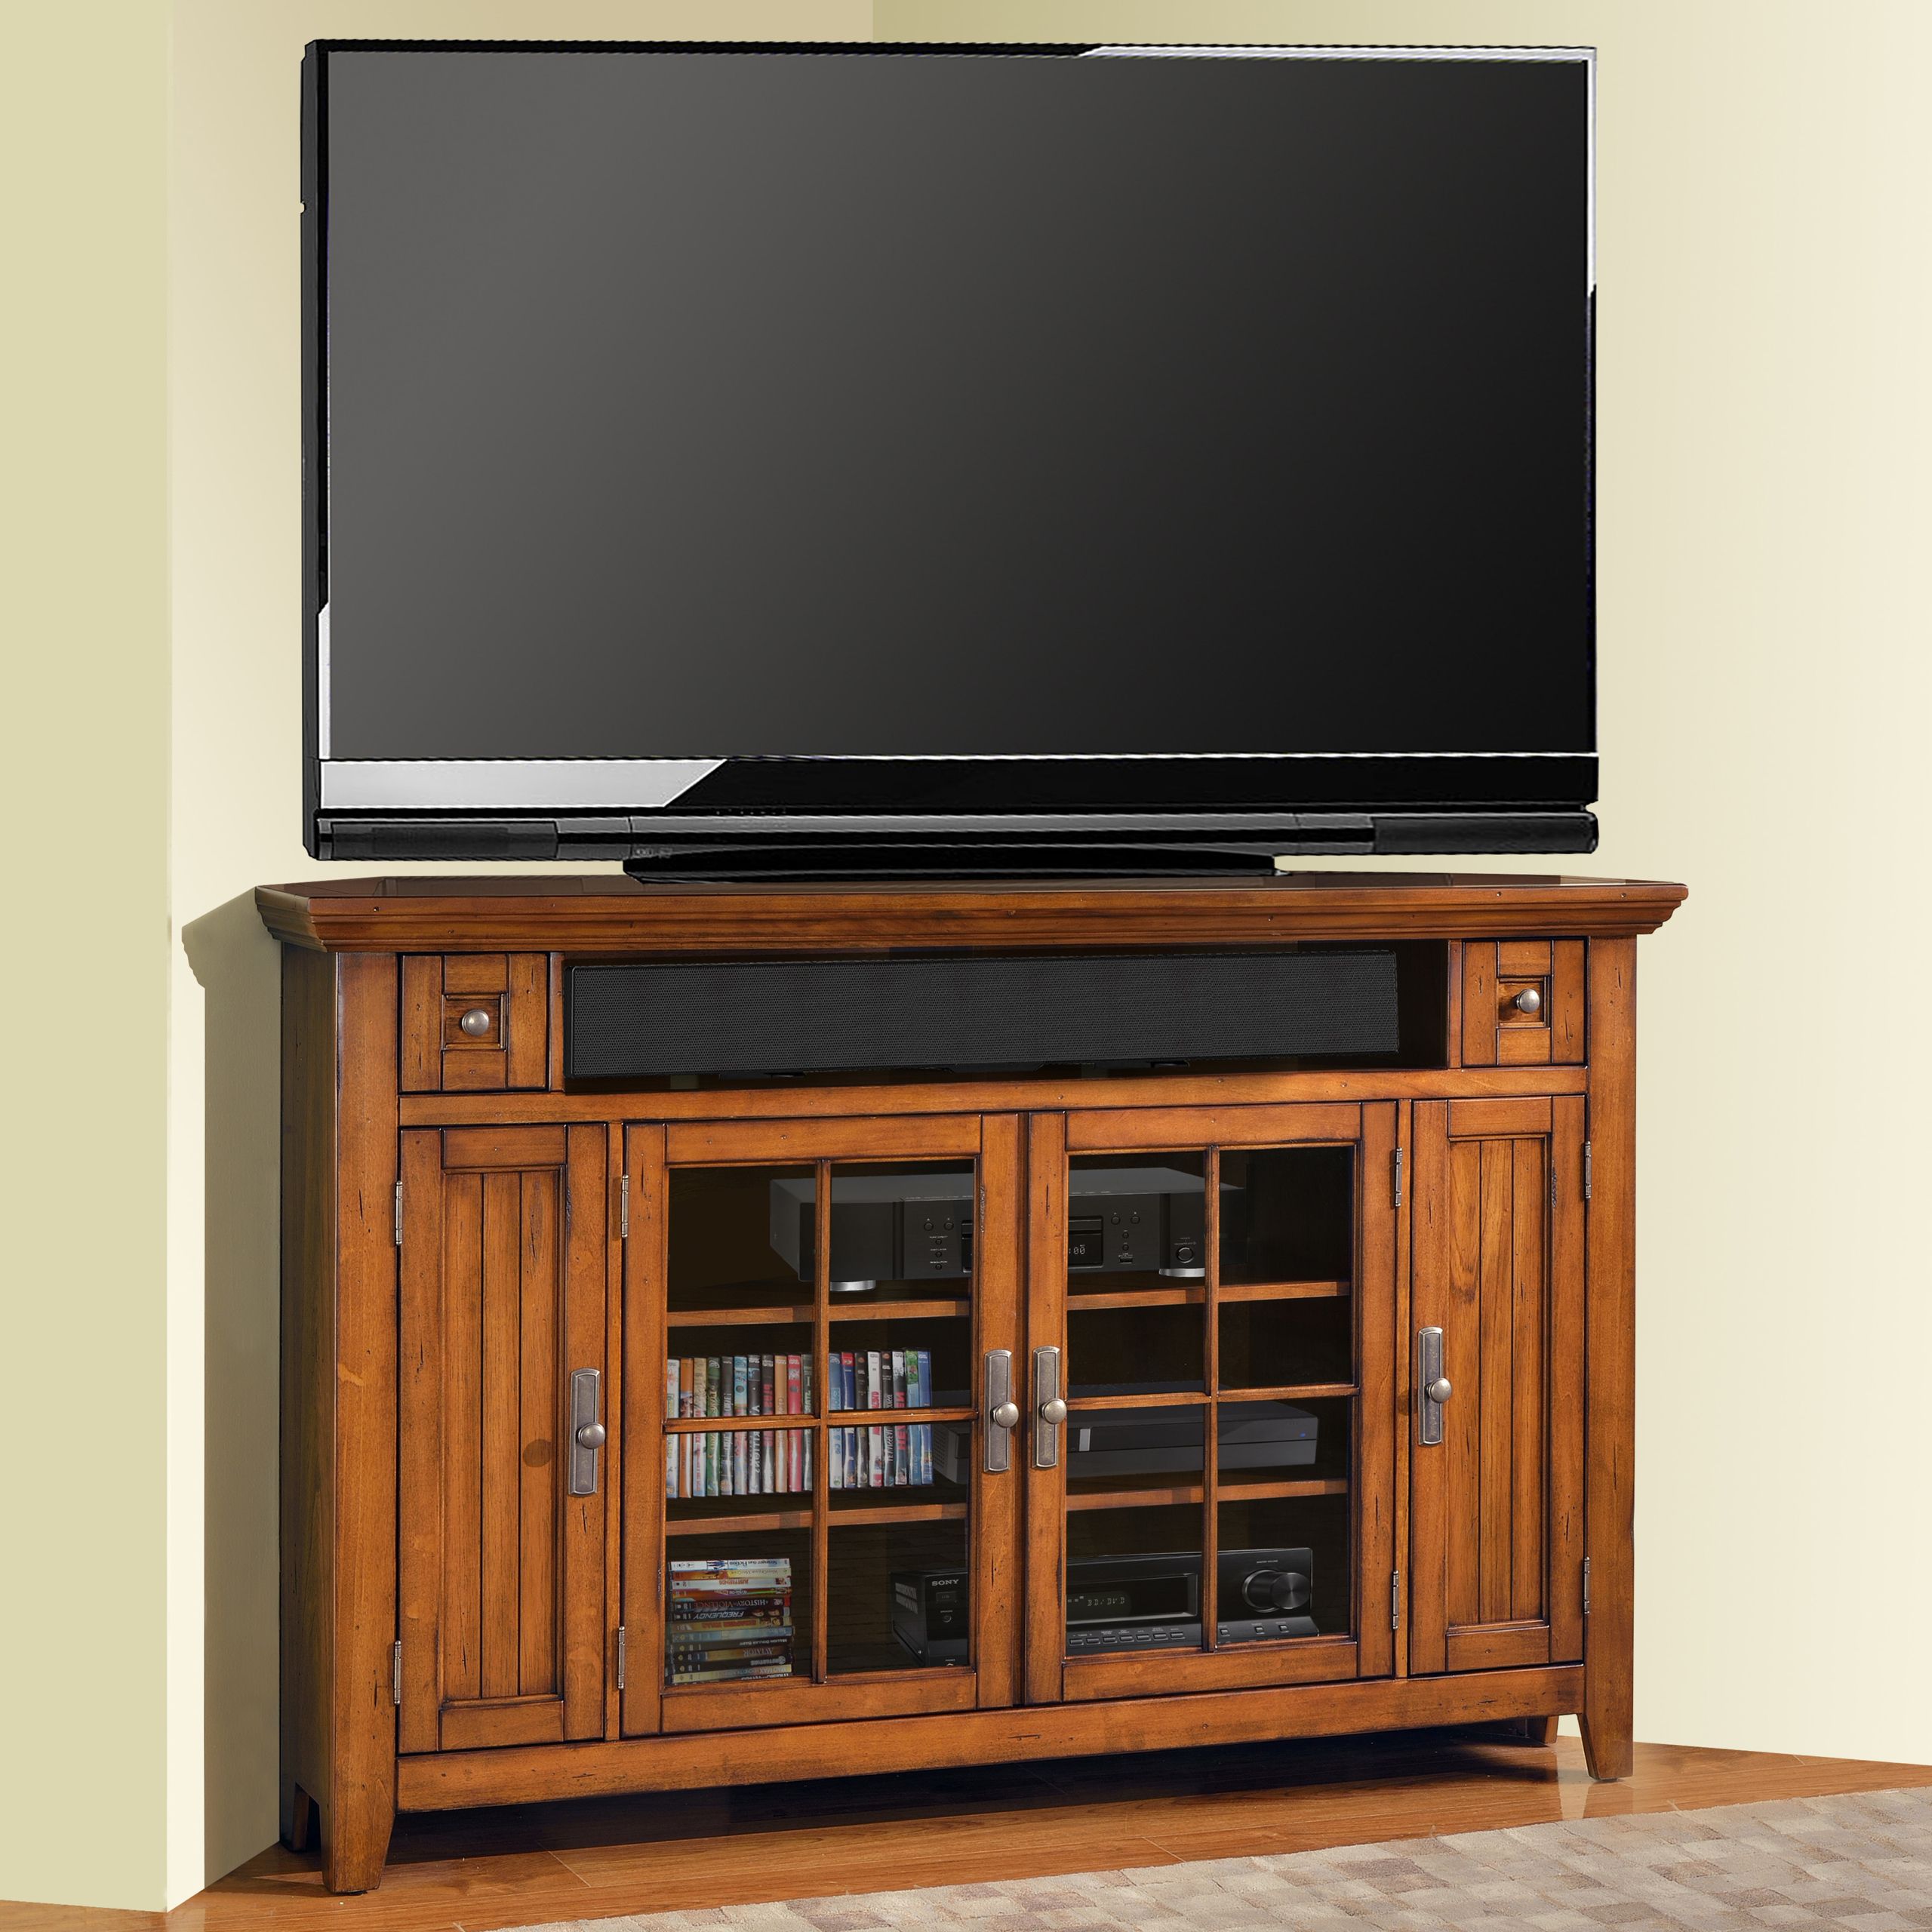 Oak Corner Tv Stands For Flat Screens – Ideas On Foter Within Oak Corner Tv Stands For Flat Screens (View 1 of 15)